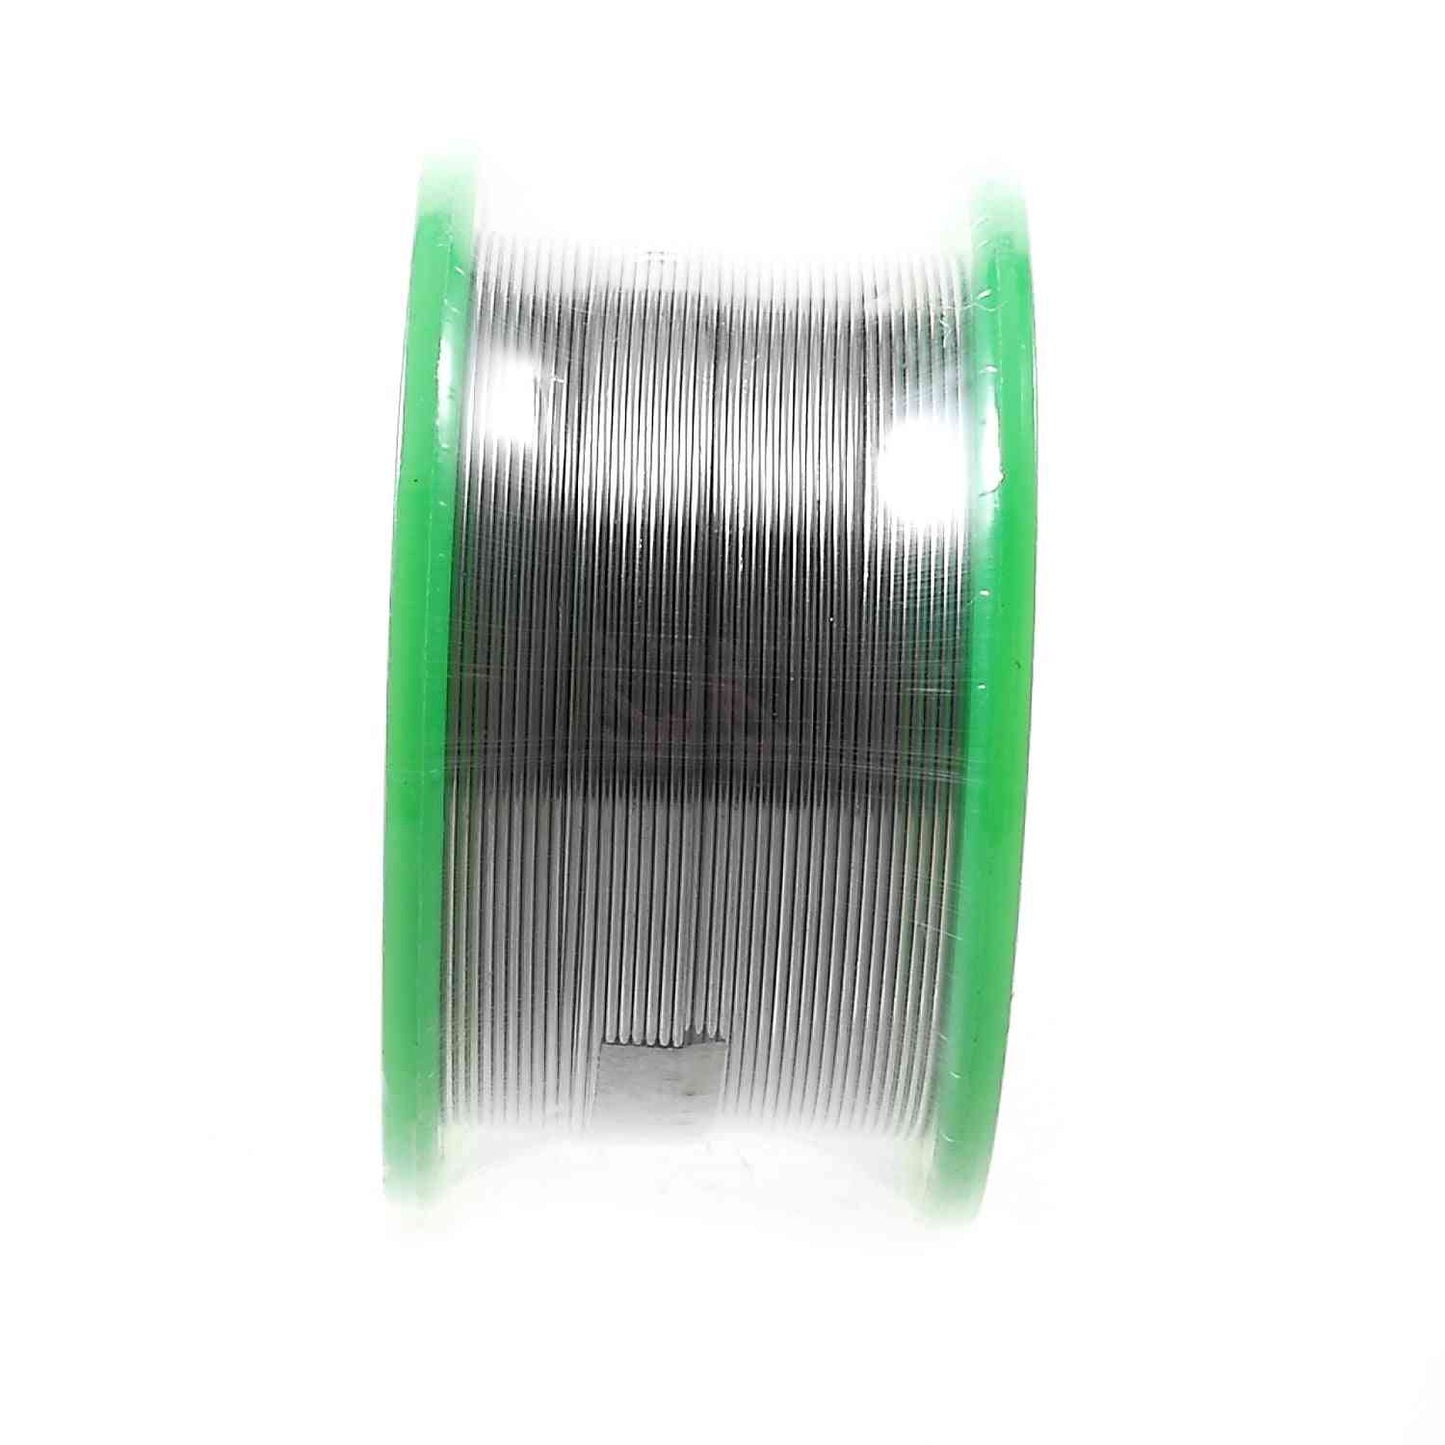 WEXTOM 0.5mm Solder Wire Soldering Tin Lead